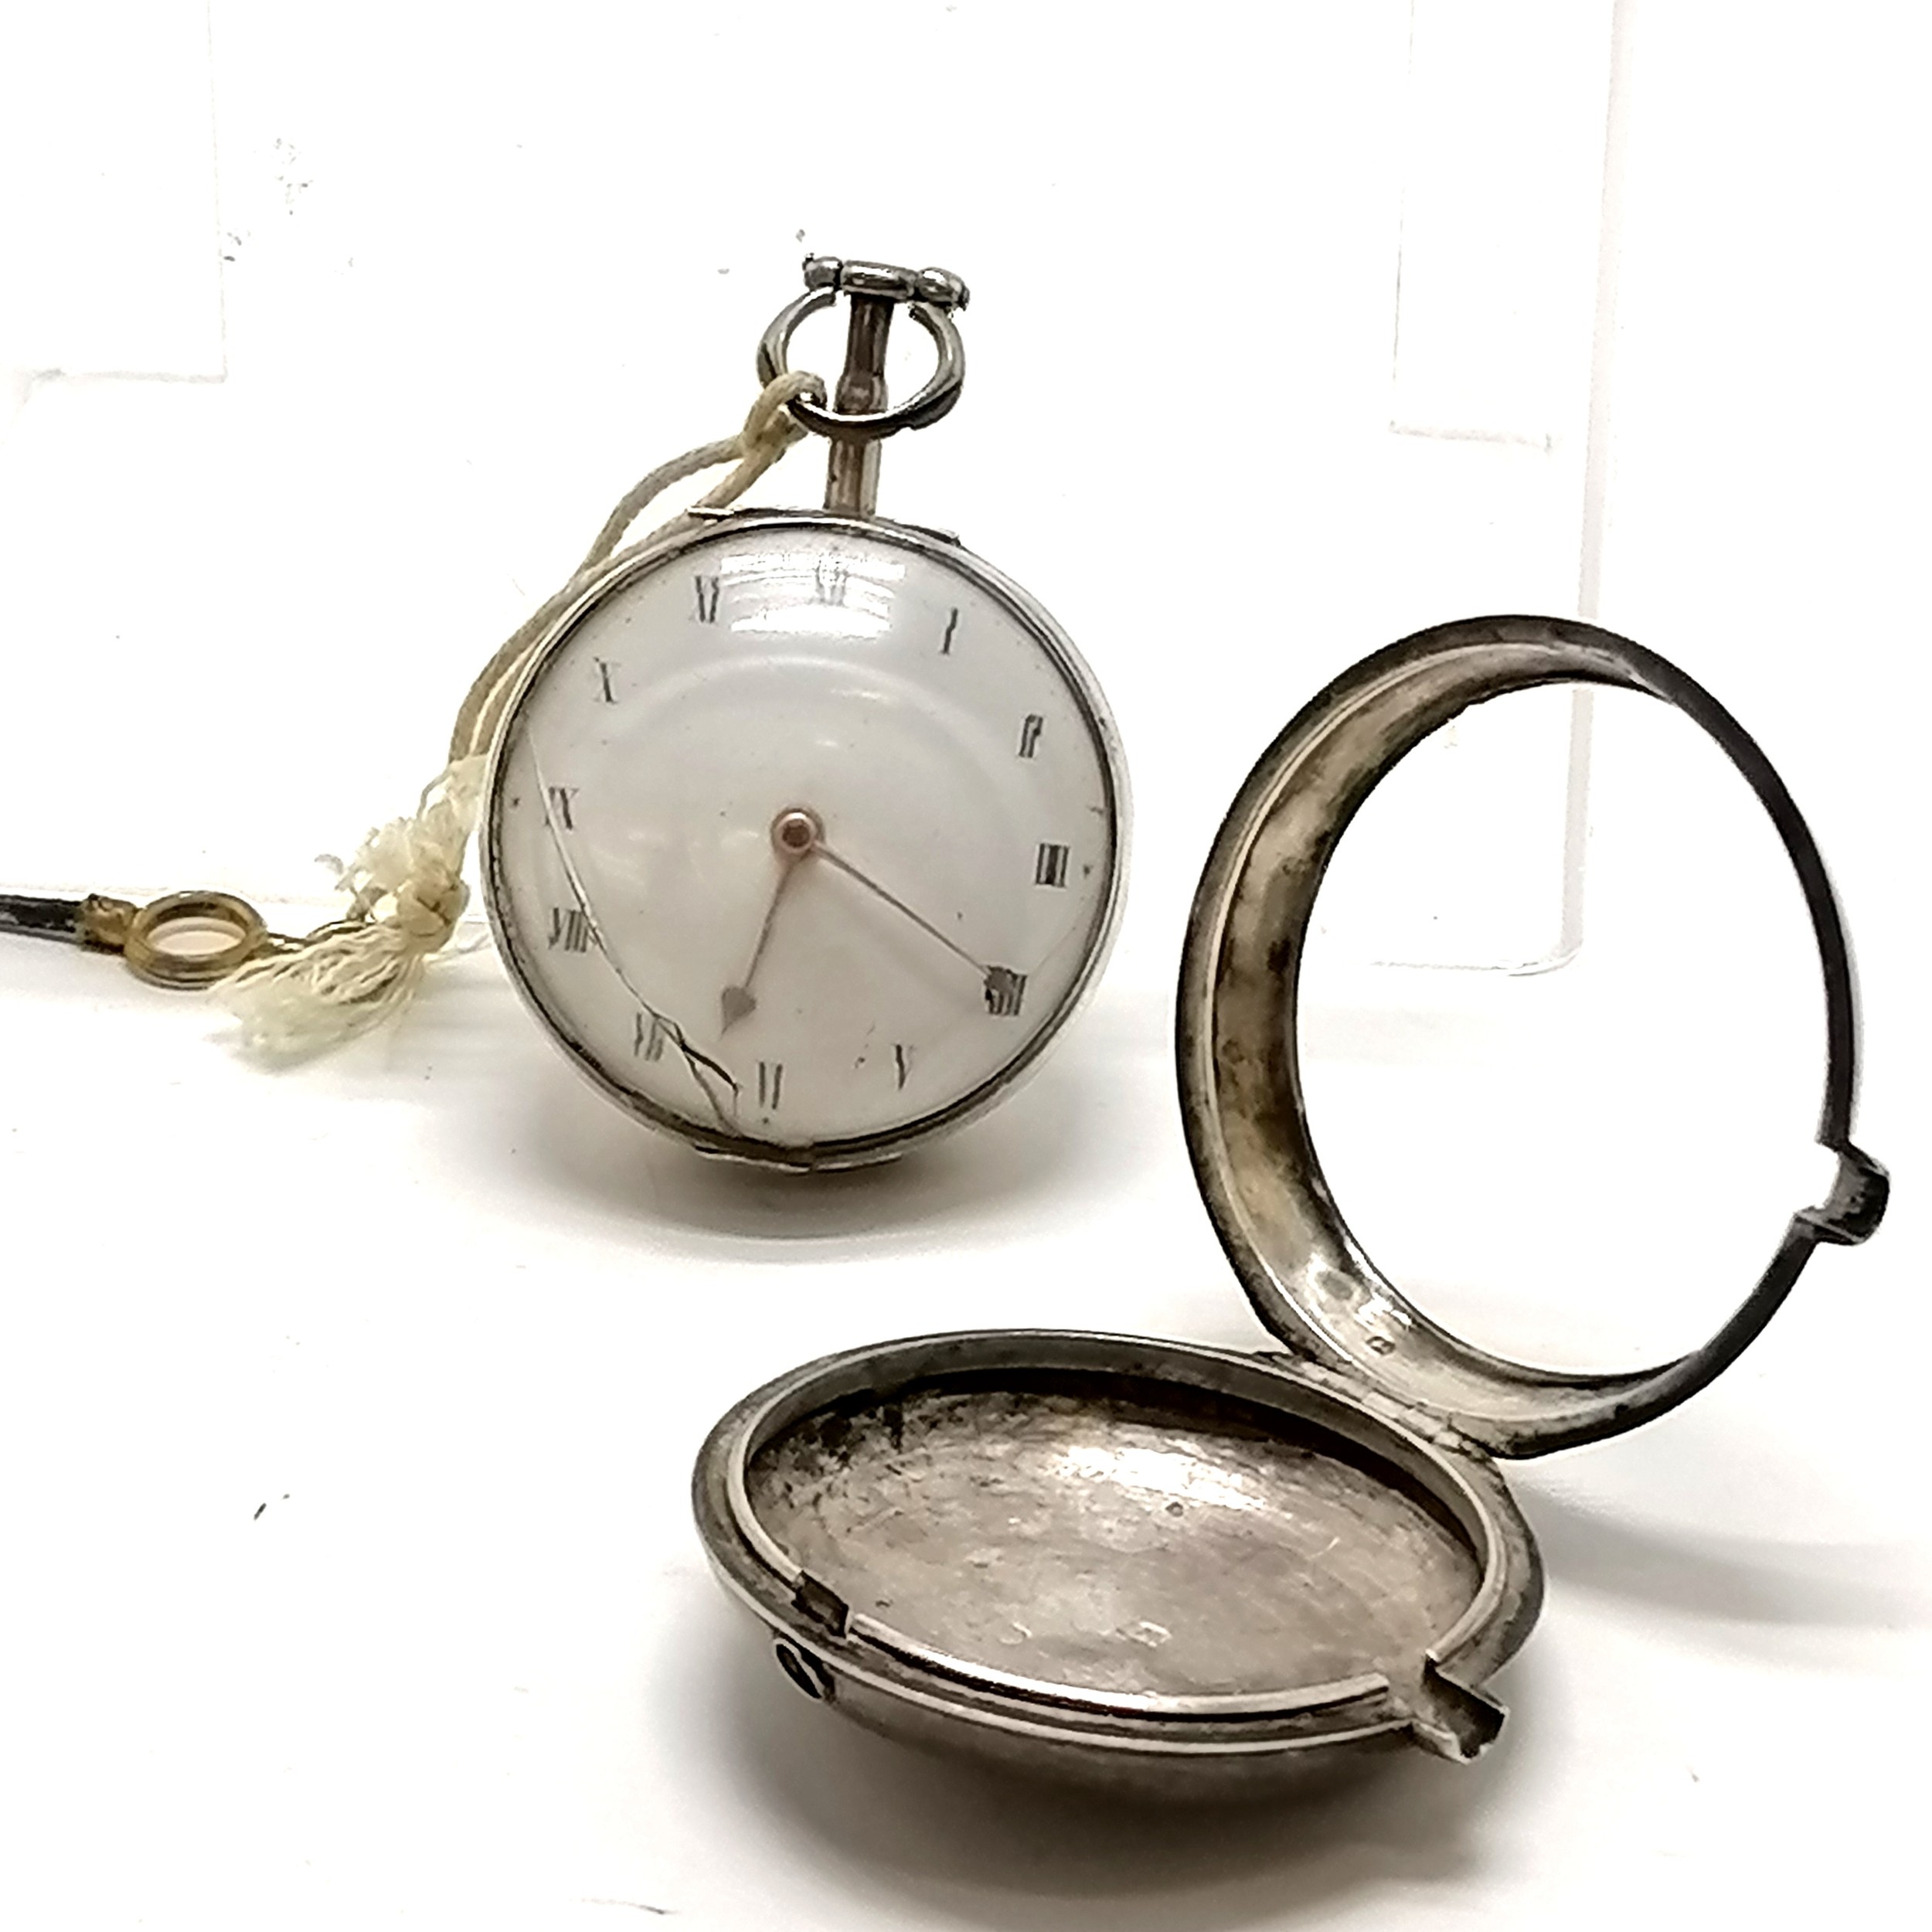 Antique silver pair cased fusee pocket watch - silver 58mm outer case 1799 by John Taylor, has - Image 2 of 4